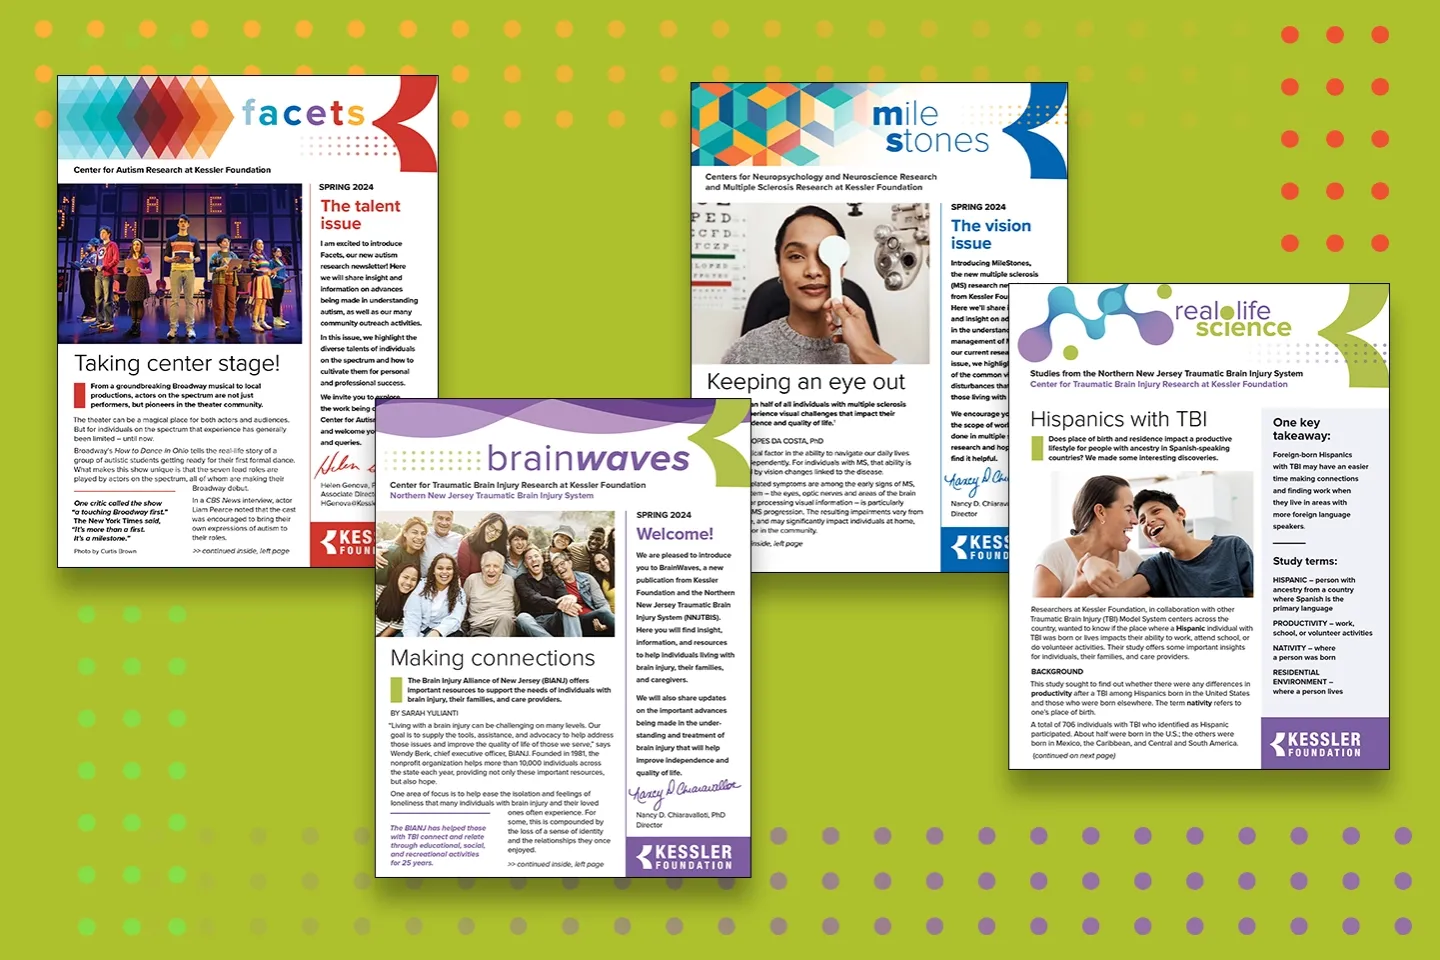 Illustration shows thumbnails of 4 redesigned newsletters from Kessler Foundation including facets, which covers autism research; brainwaves and real-life science, which cover traumatic brain research; and MileStones, which covers multiple sclerosis research.